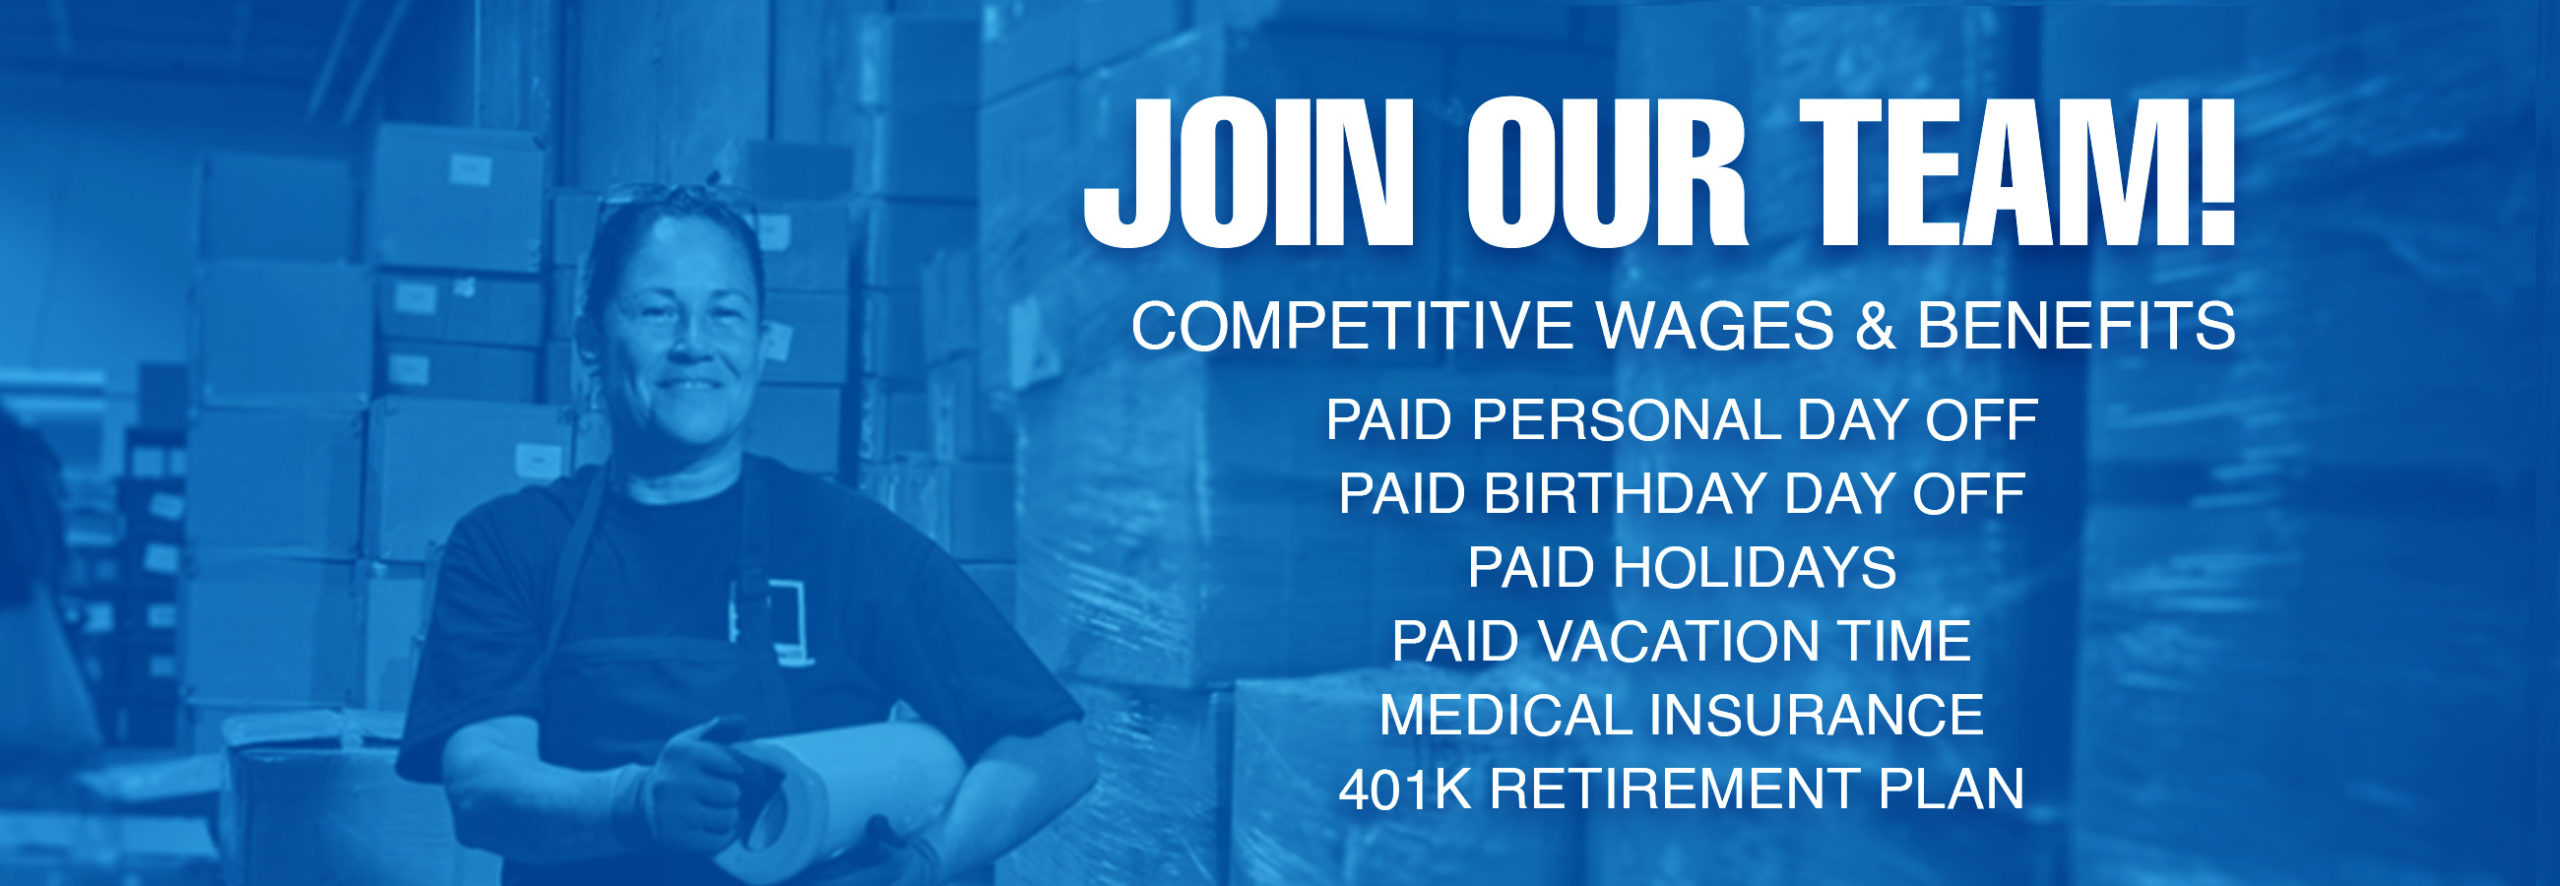 Join the Goodwill team!